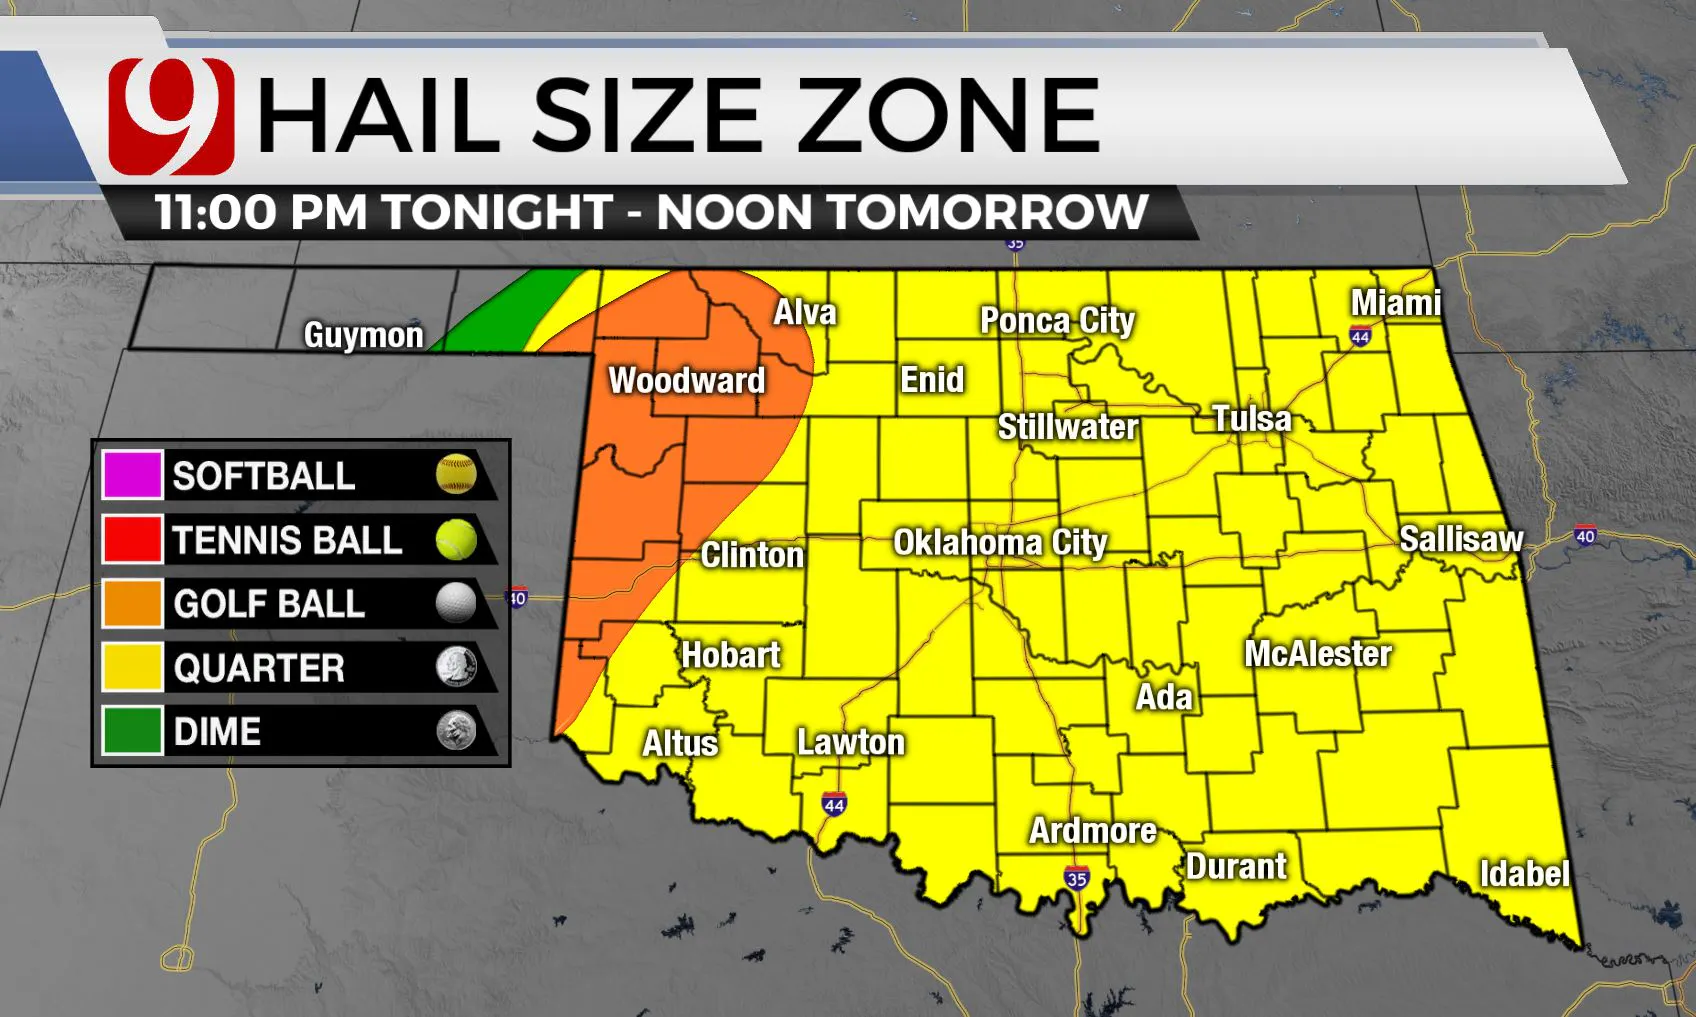 Hail zone across the state.